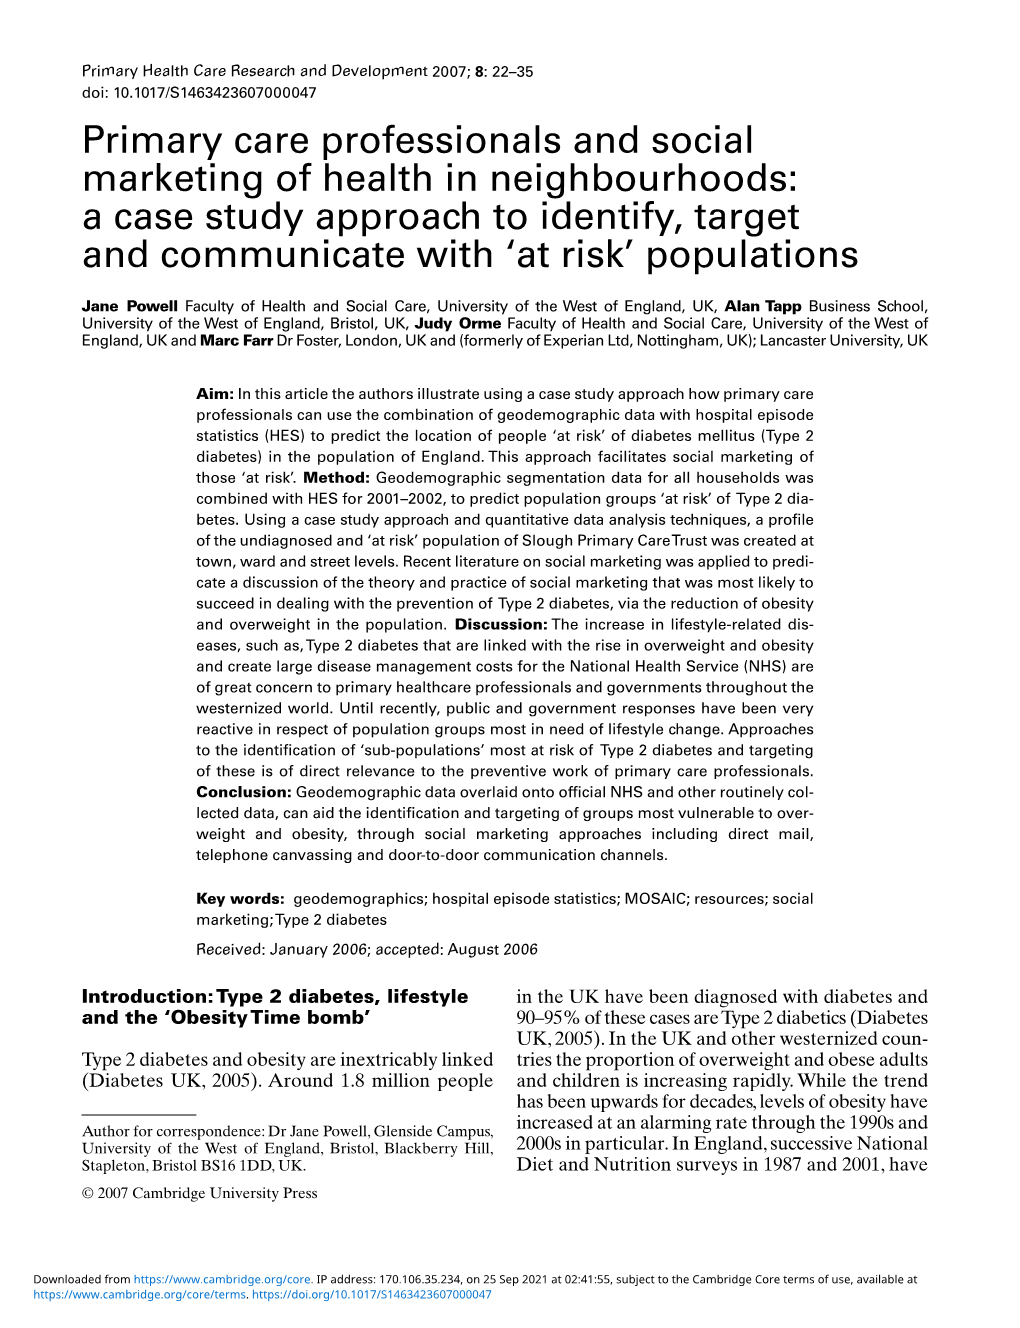 Primary Care Professionals and Social Marketing of Health in Neighbourhoods: a Case Study Approach to Identify, Target and Communicate with ‘At Risk’ Populations